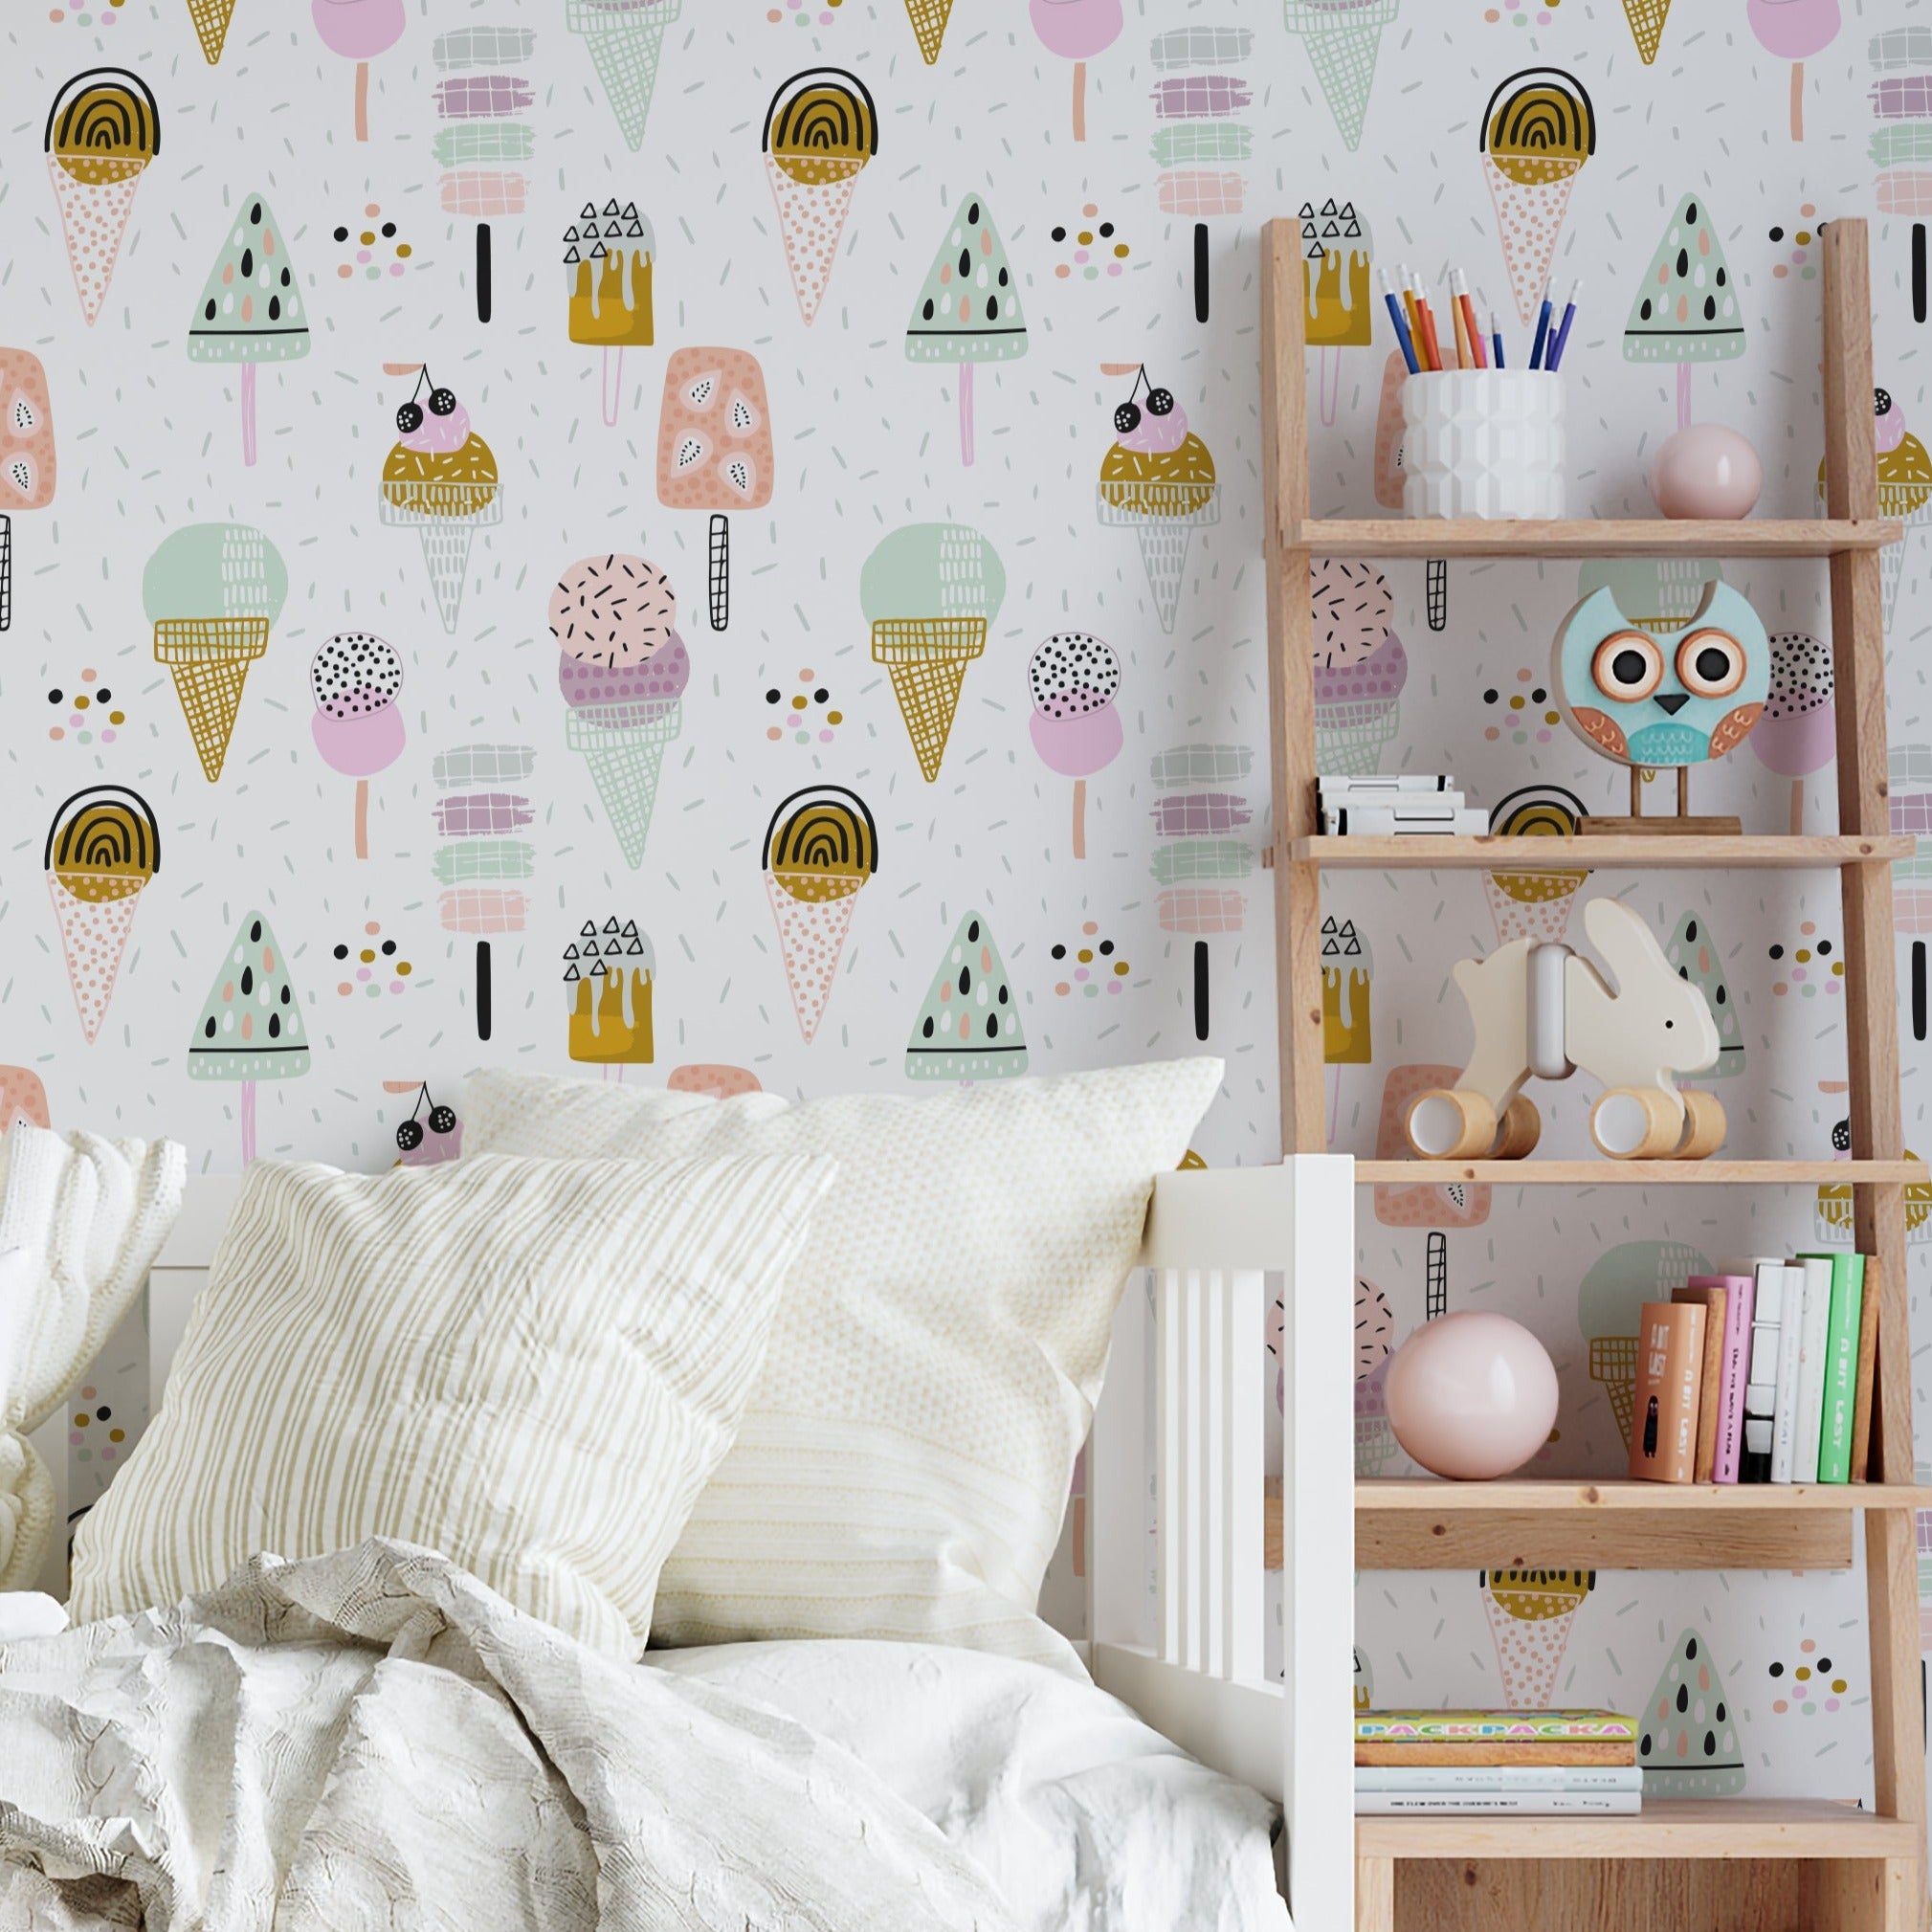 Children's bedroom showcasing walls adorned with playful ice cream cone and popsicle wallpaper in pastel colors, complementing a cozy corner filled with plush toys, books, and wooden shelving for a fun and inviting atmosphere.